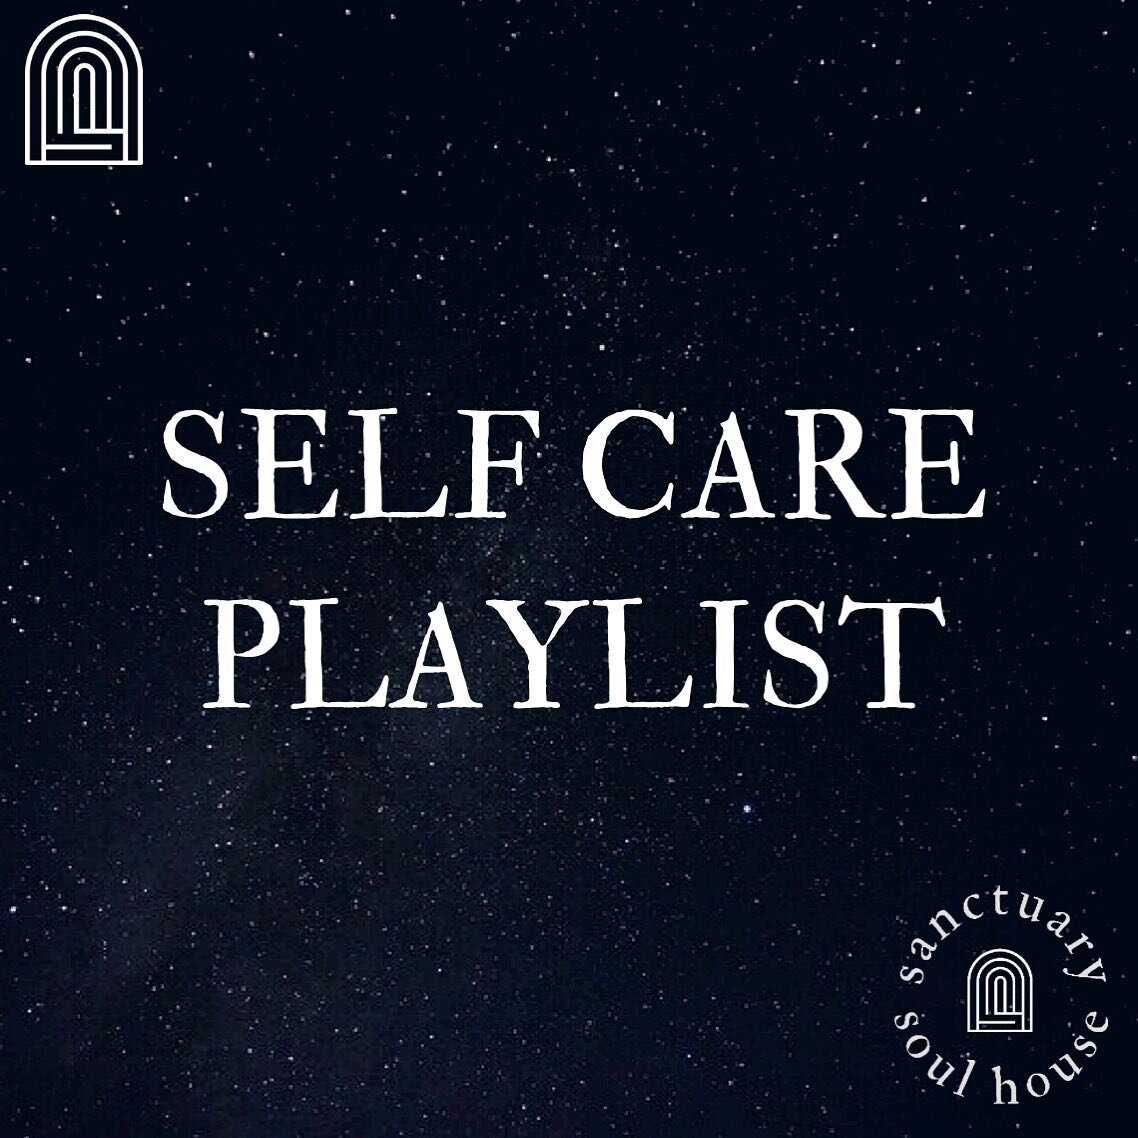 As the year comes to an end tonight, I bring you one final gift for 2021, a self care playlist (link in bio)! Listen to it to enhance your self care practice and indulge in joy, self love, healing, and manifestation vibes. Cheers to a new year and a 